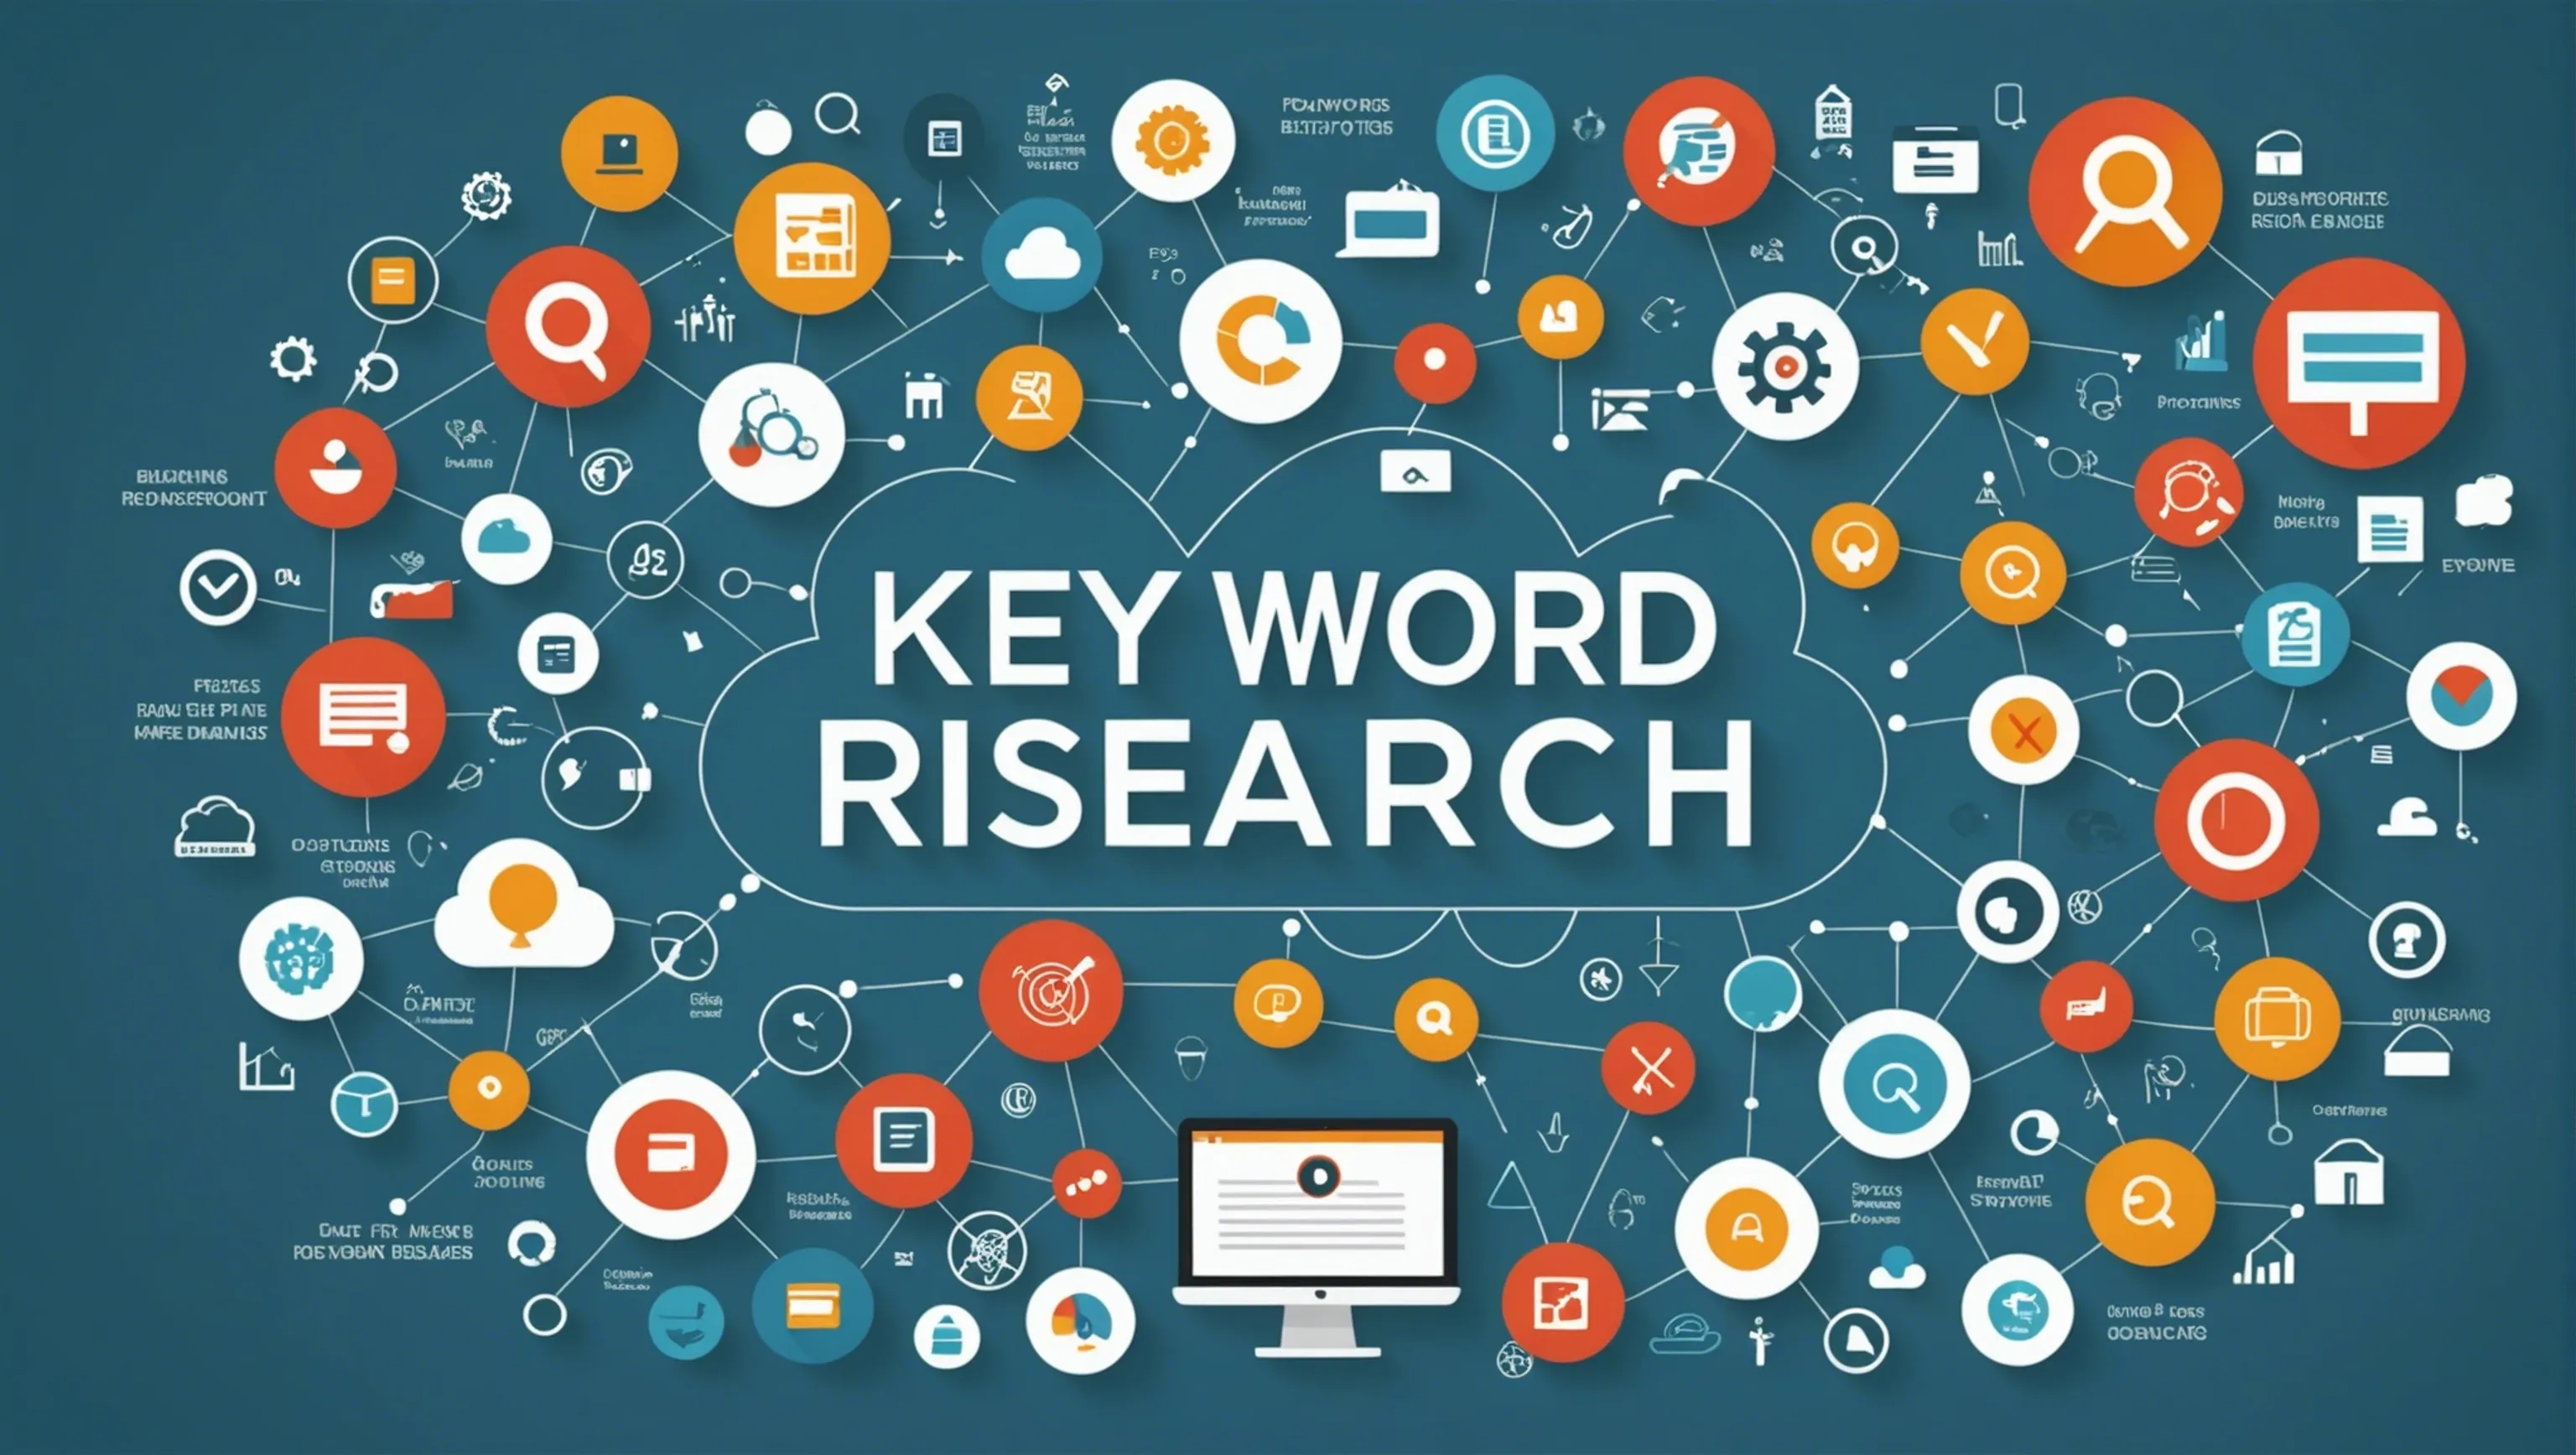 Keyword research tools for marketing professionals